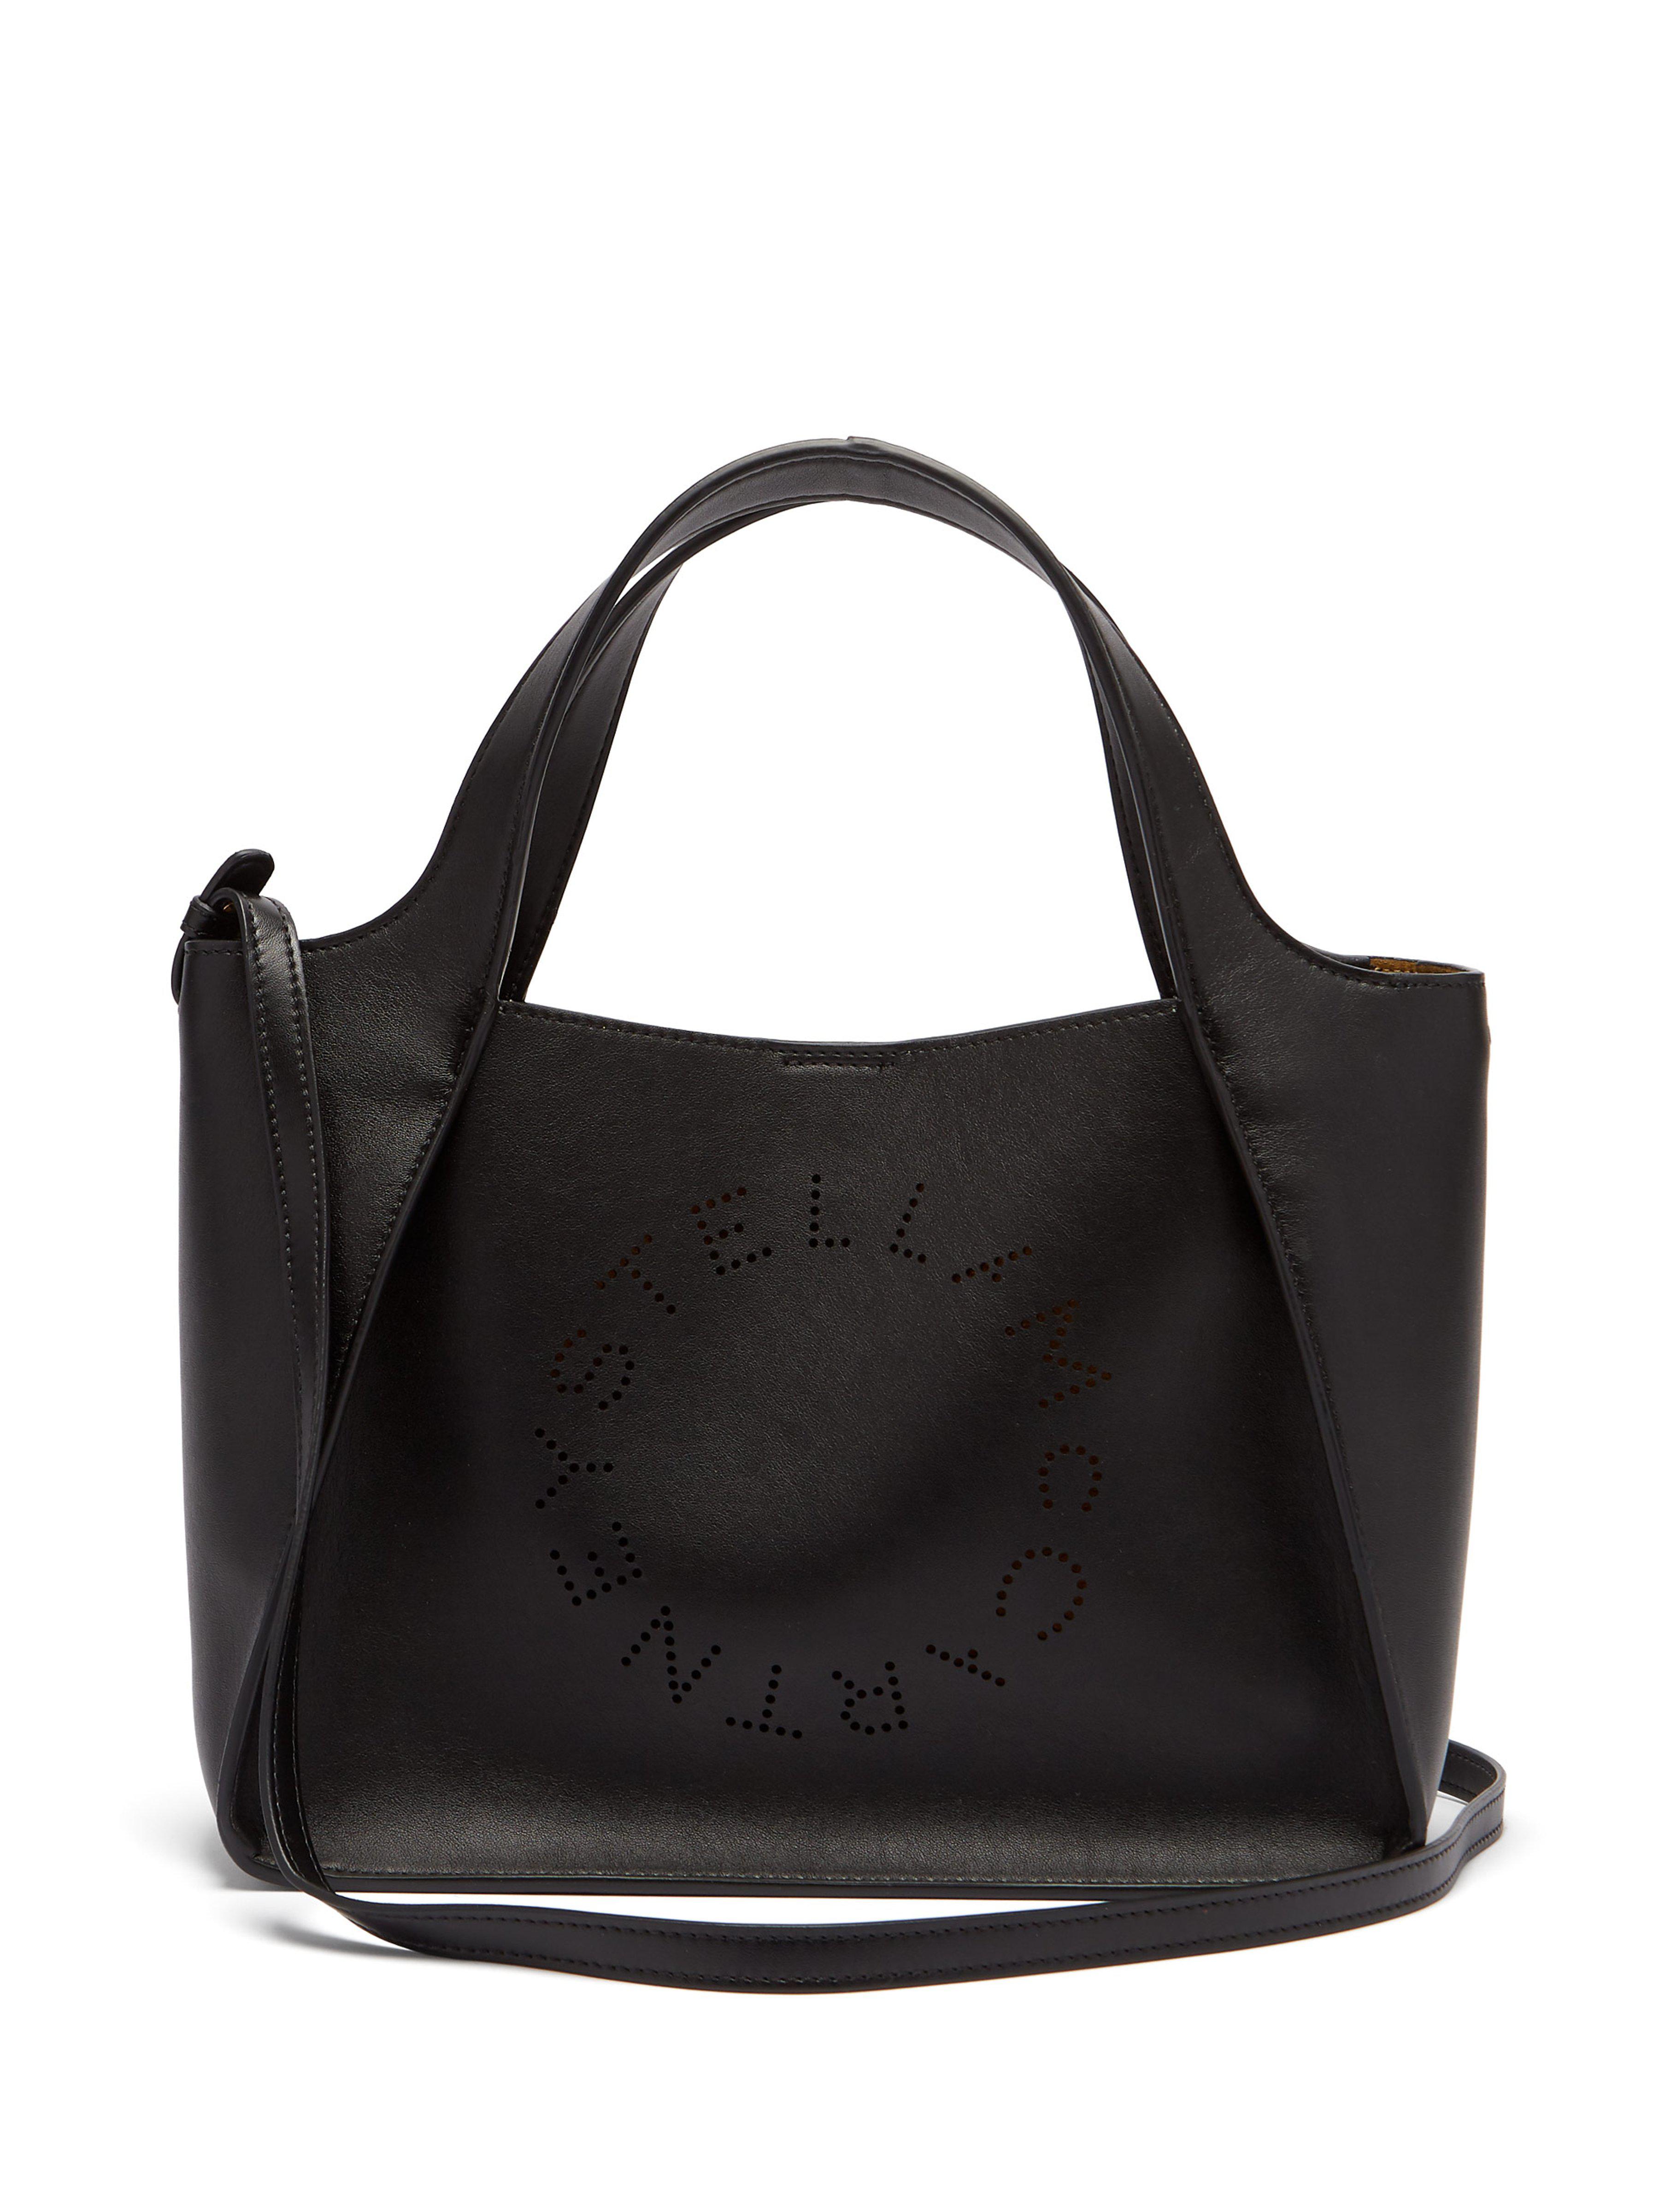 Stella McCartney Stella Perforated Logo Faux Leather Tote Bag in Black ...